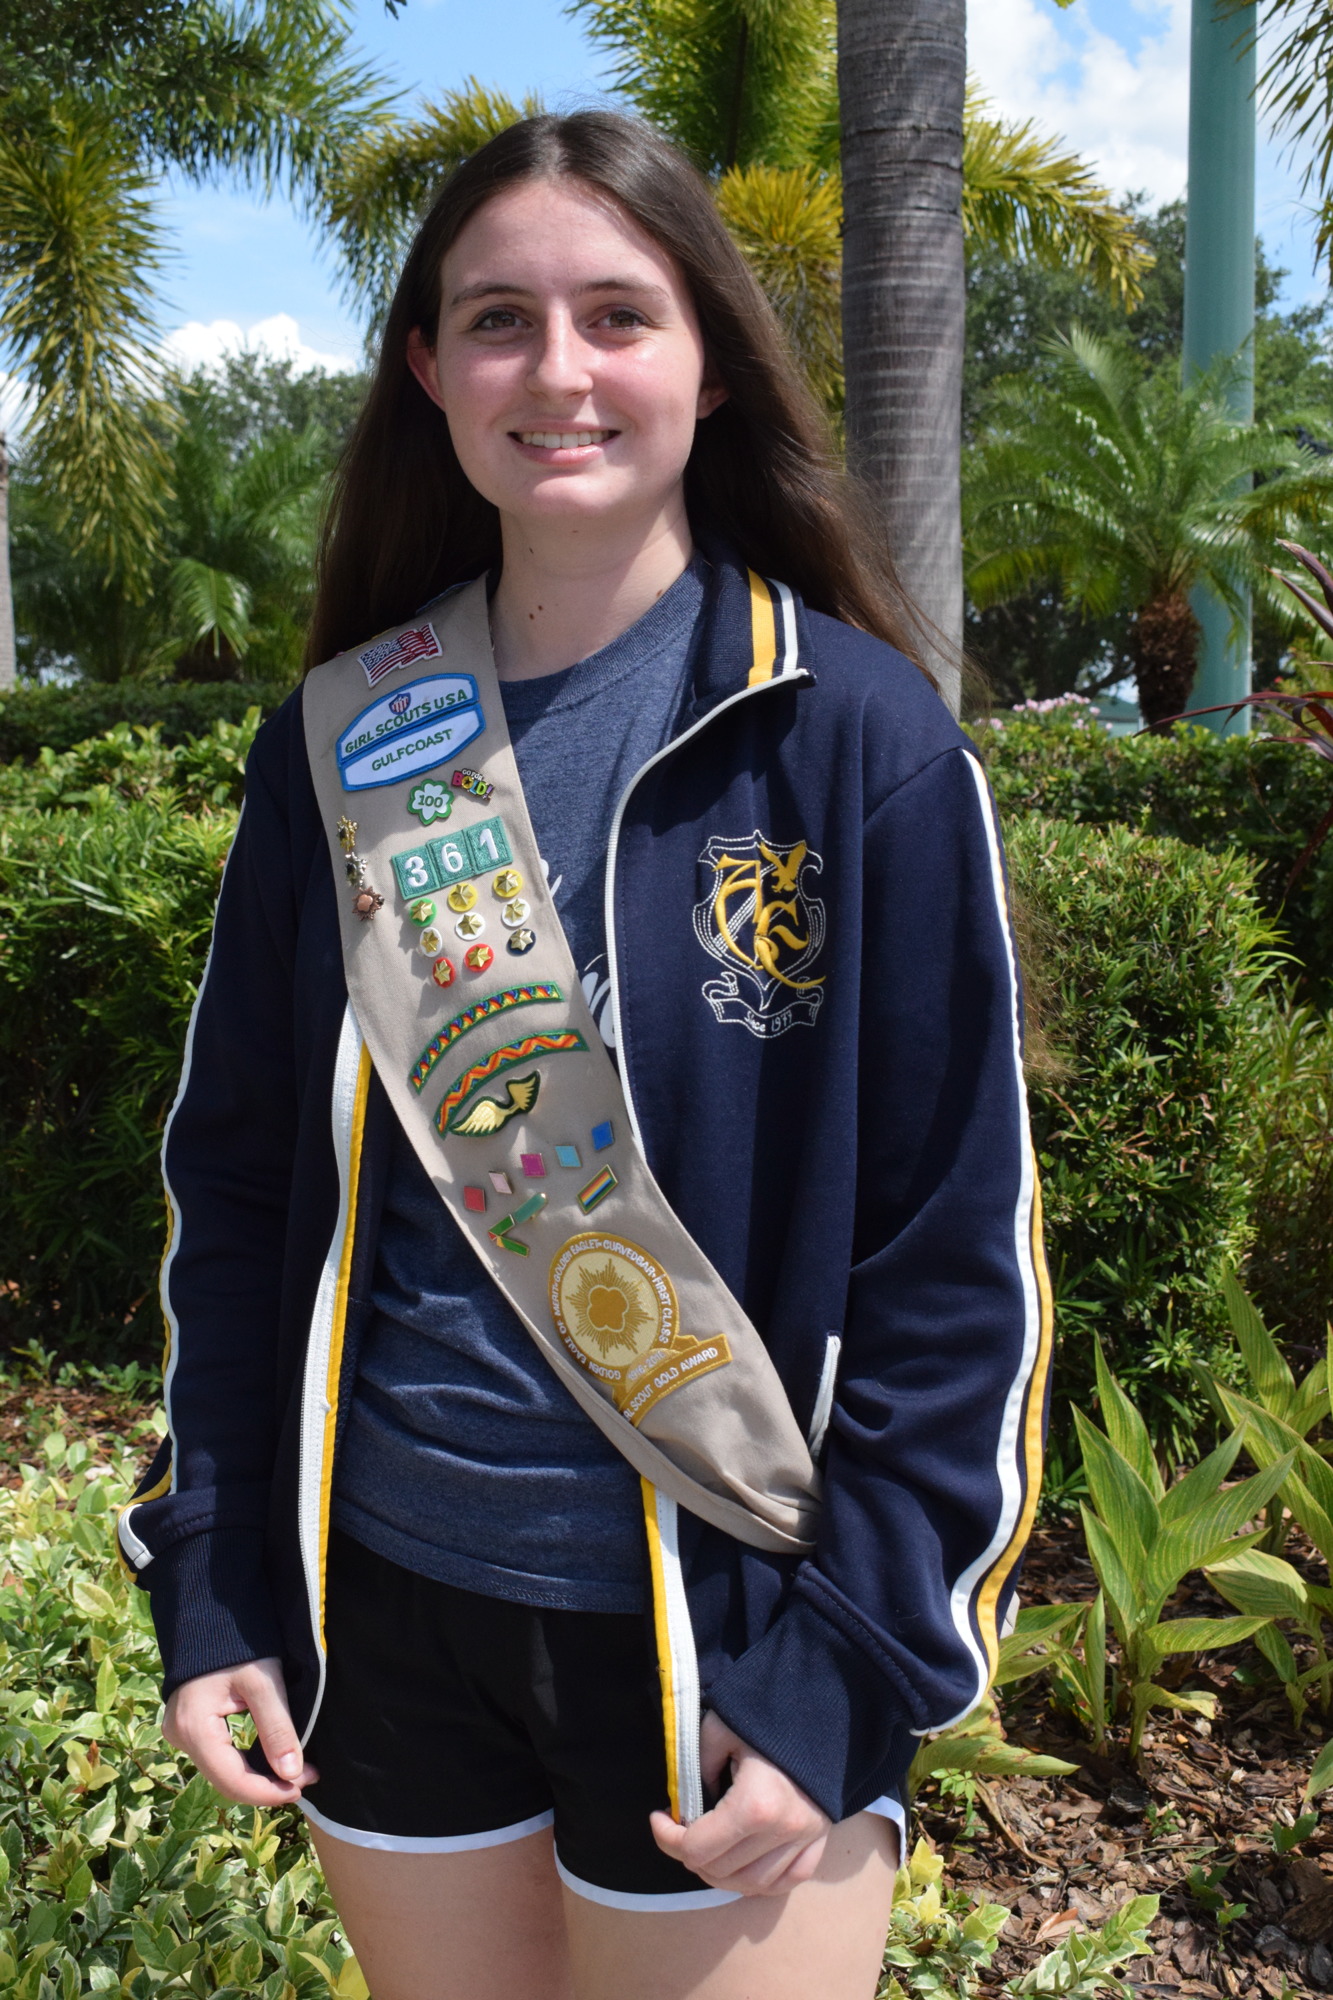 Sydney Shepard earns her Girl Scout Gold Award by developing a garden for residents at DeSoto Beach Club and helping residents garden. Photo by Liz Ramos.